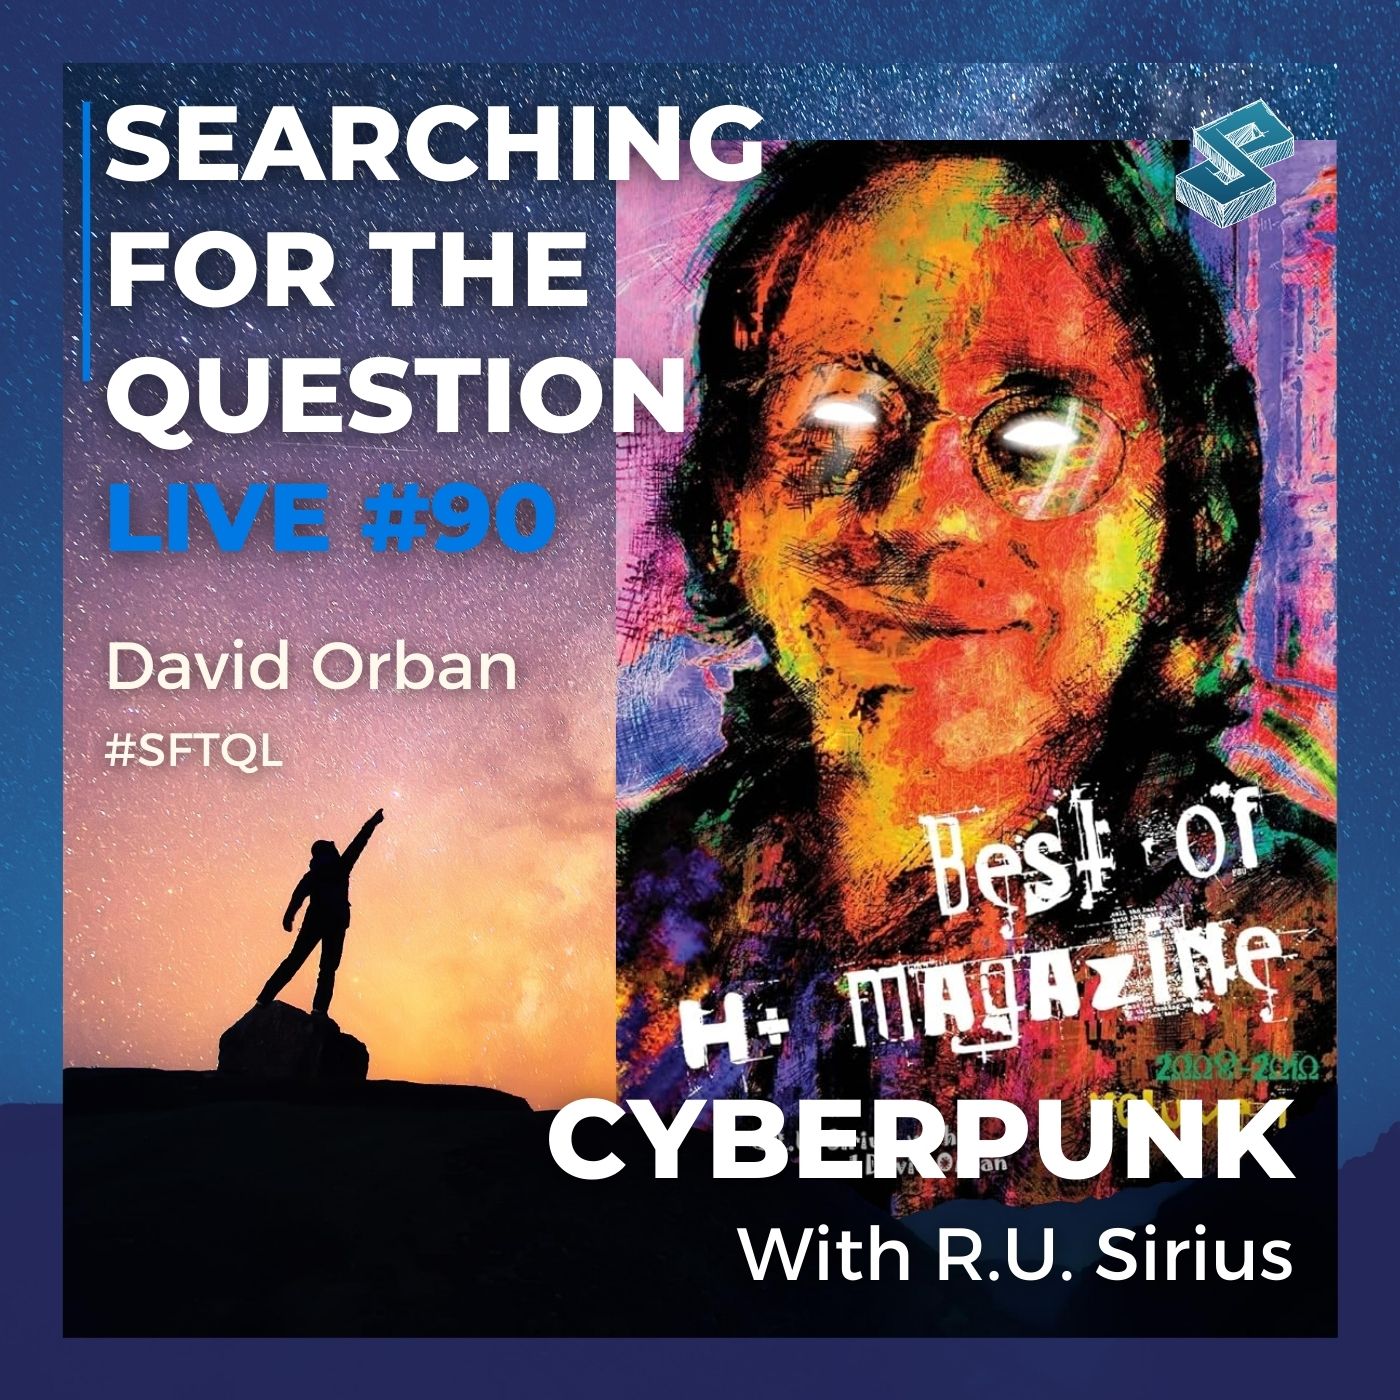 Cyberpunk with R.U. Sirius - Searching For The Question Live #90